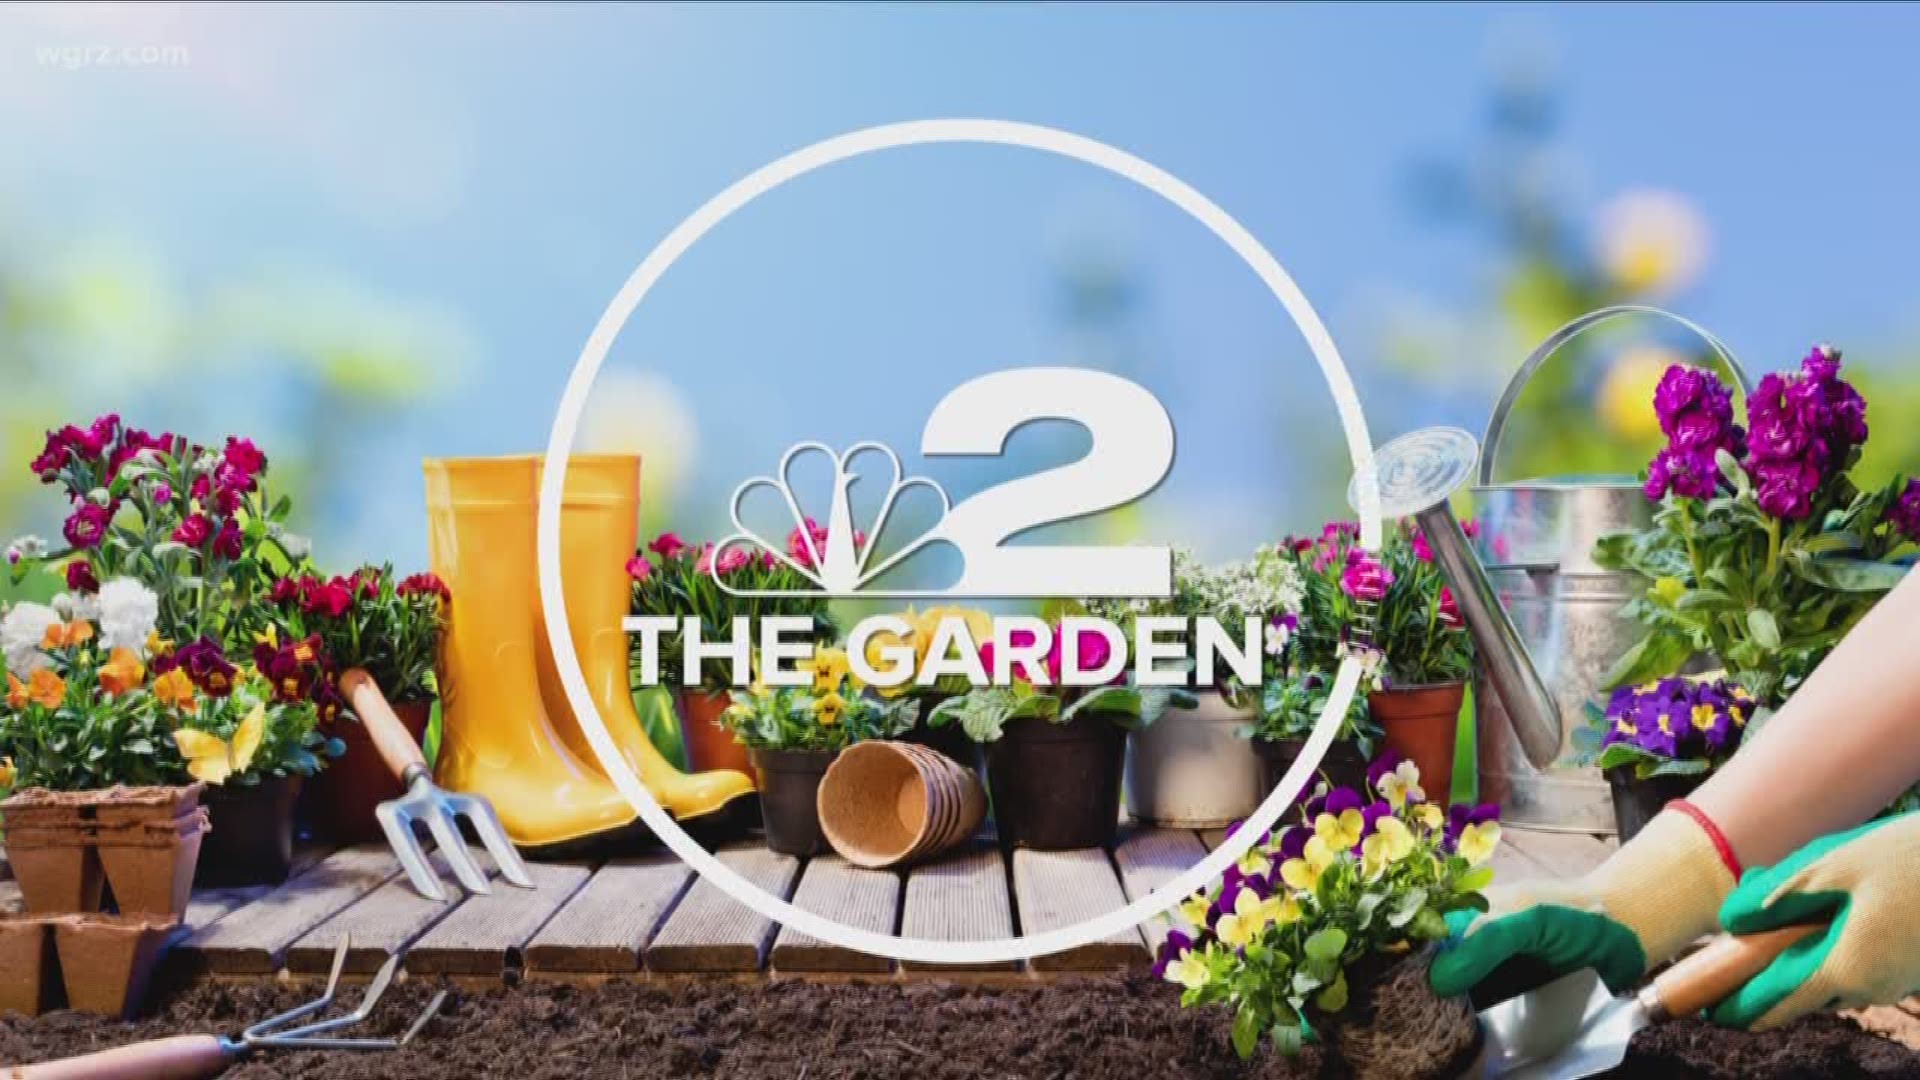 It's finally starting to feel like spring - so Jackie's showing how to get your Spring gardening started.